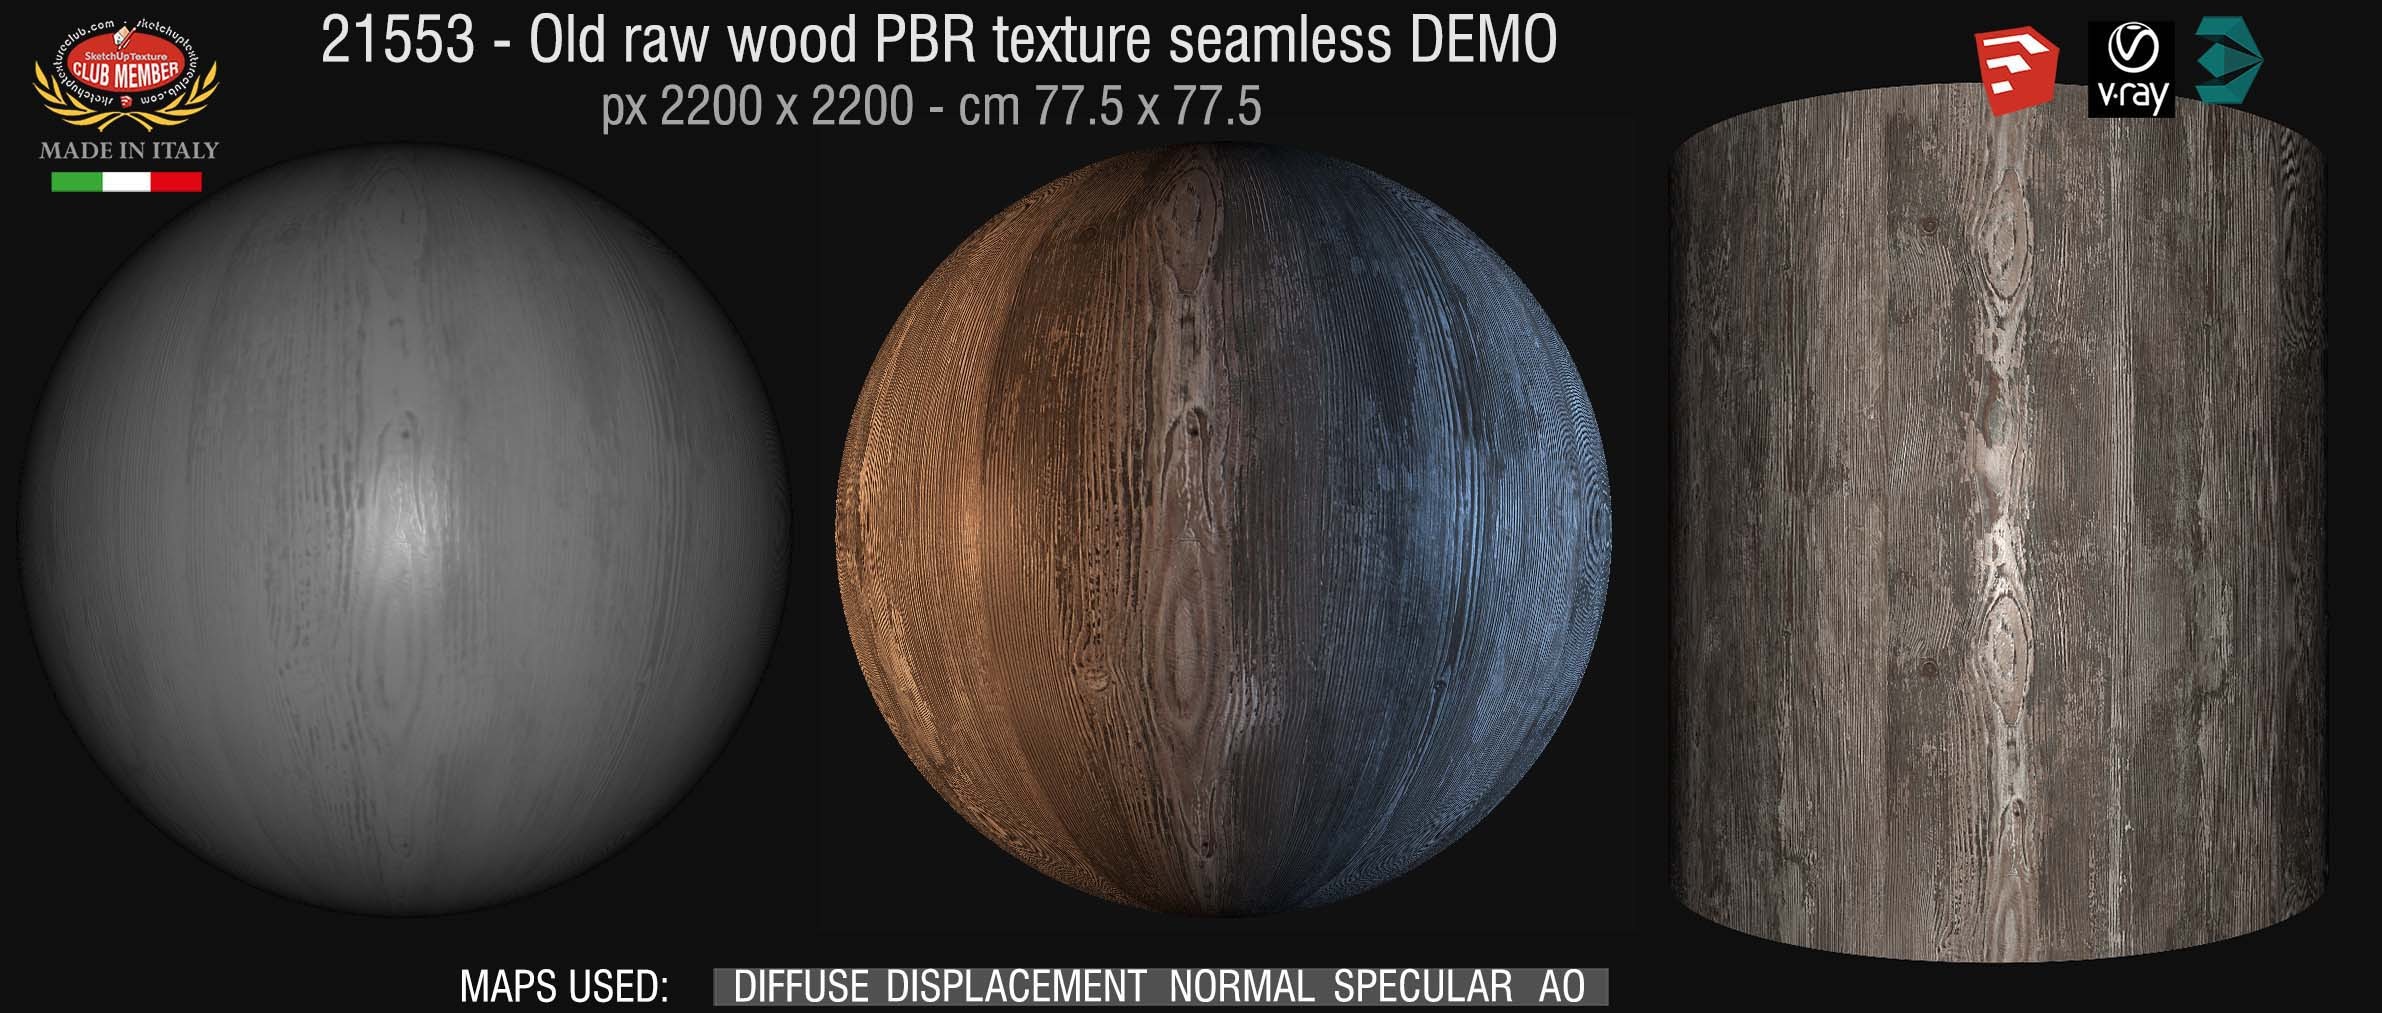 21553 Old raw wood PBR texture seamless DEMO